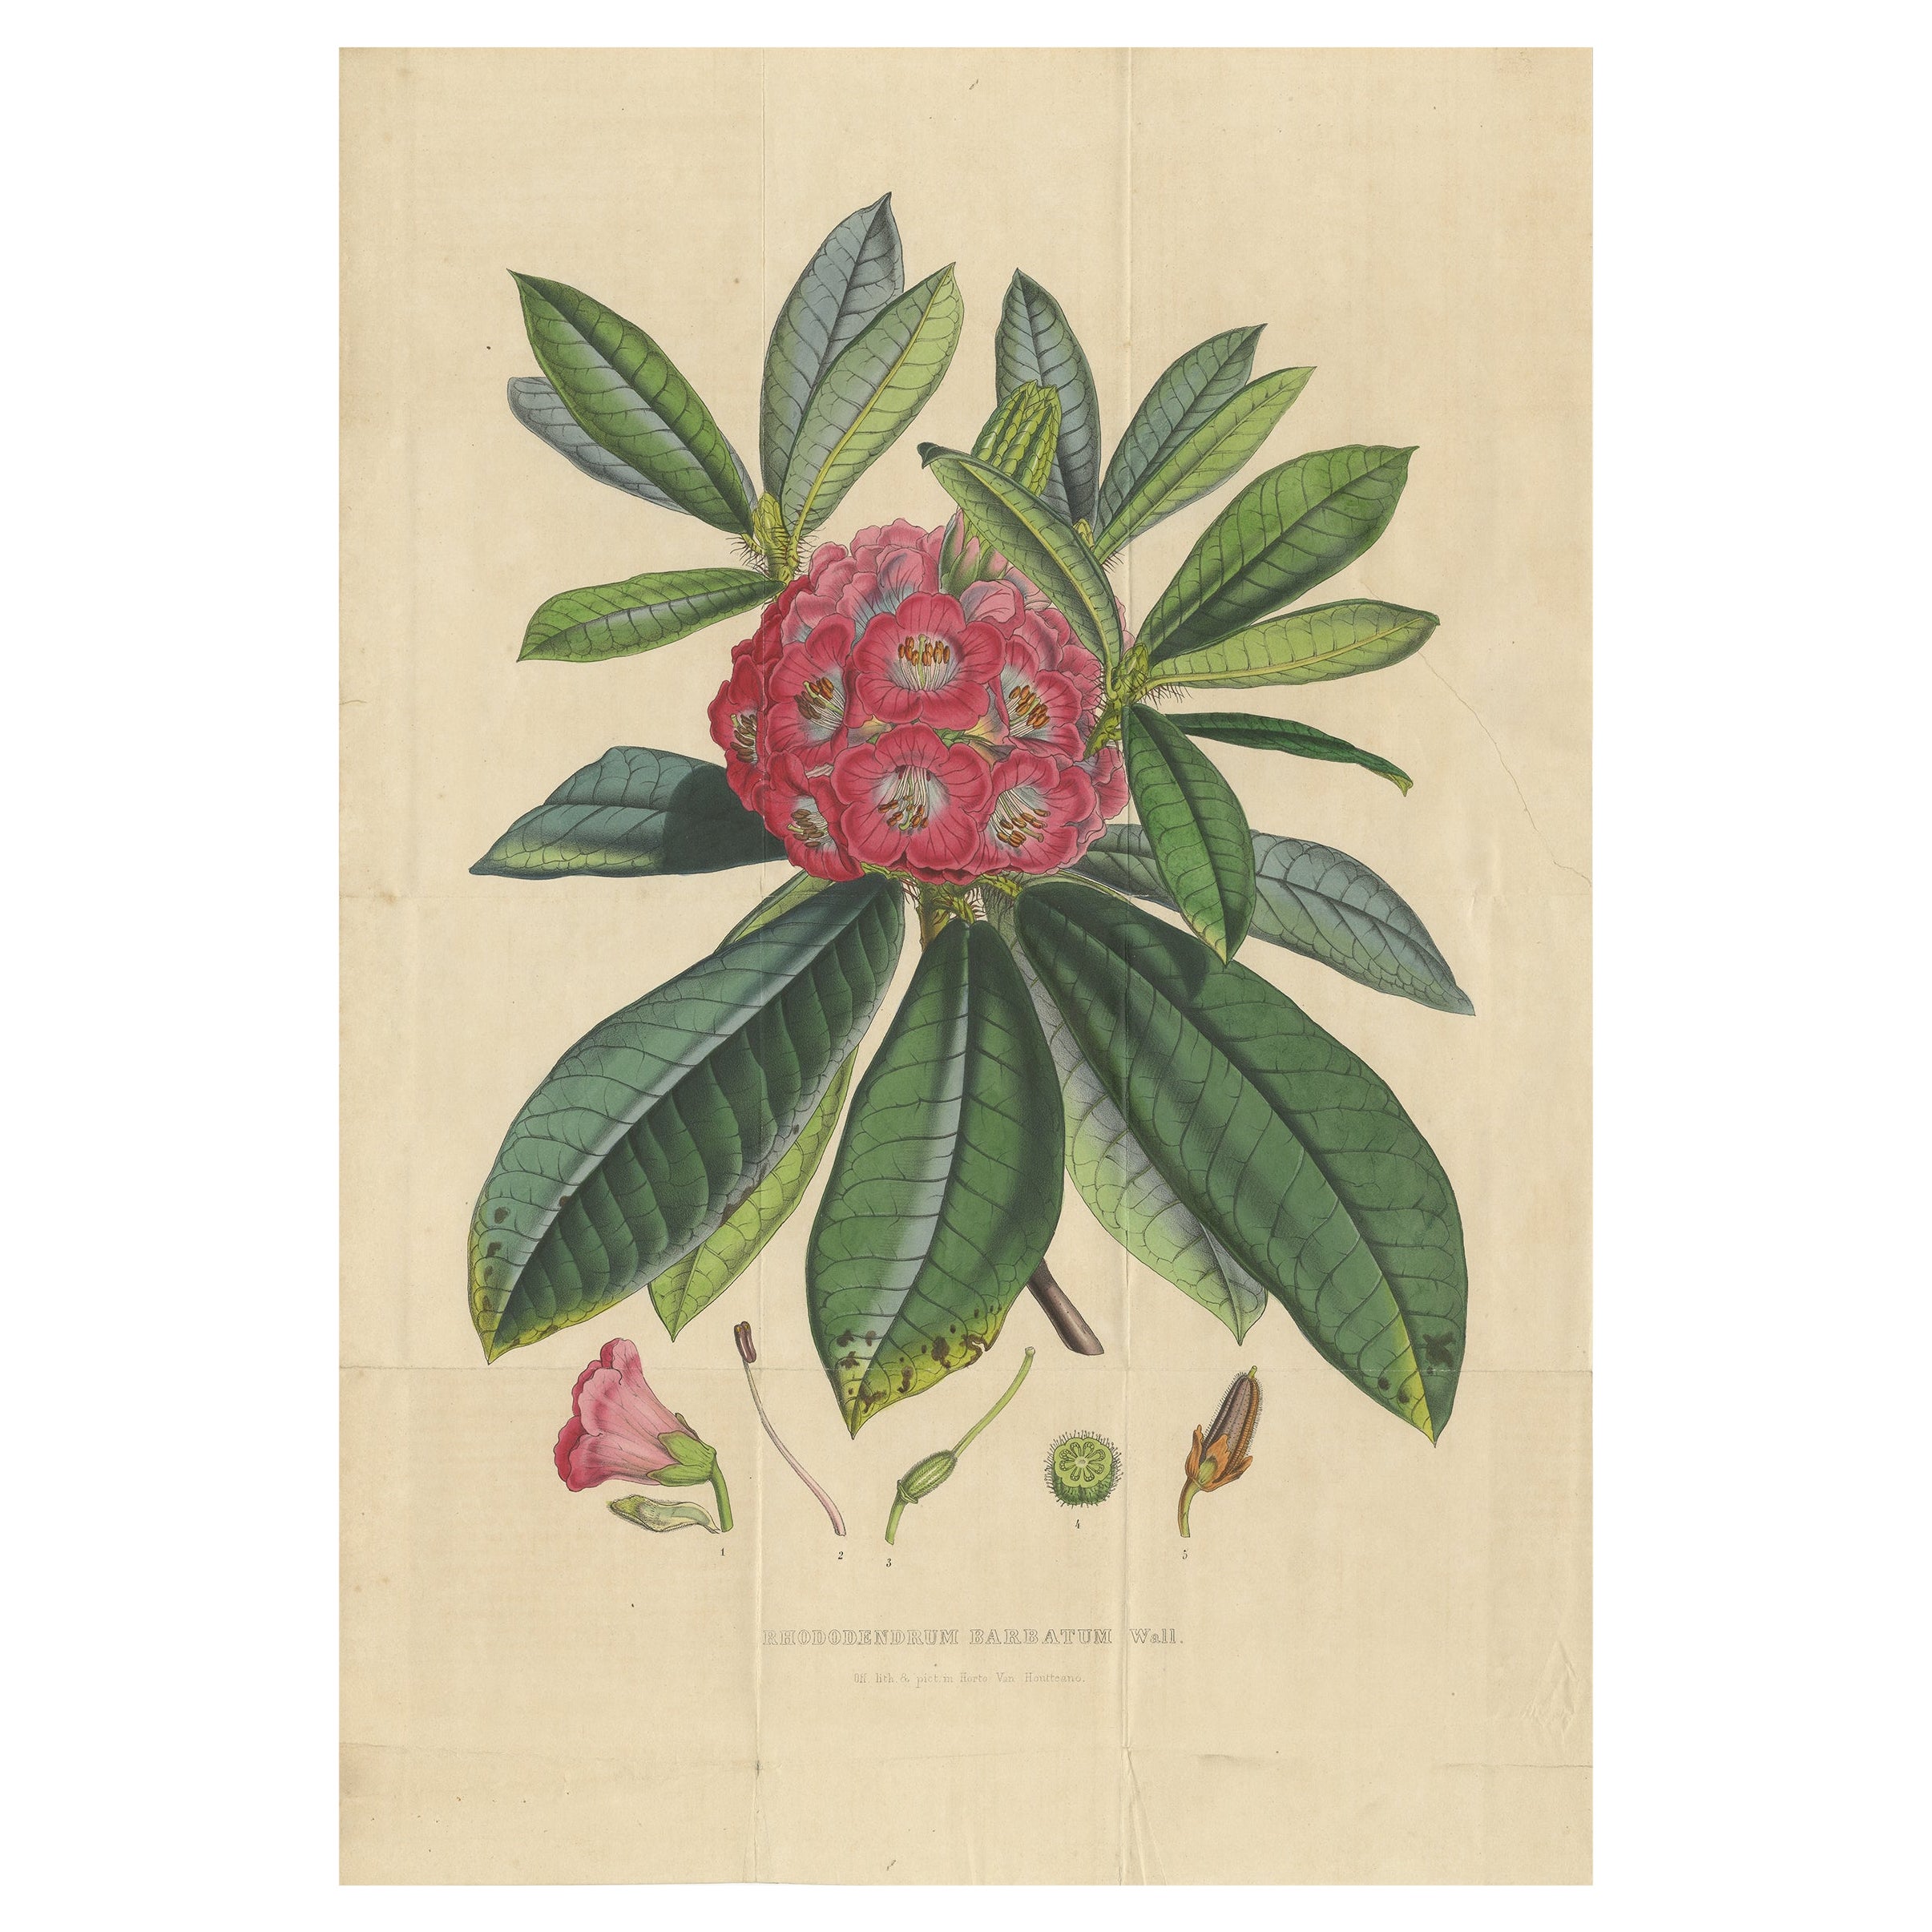 Antique Botany Print of The Rhododendron Barbatum, 1849